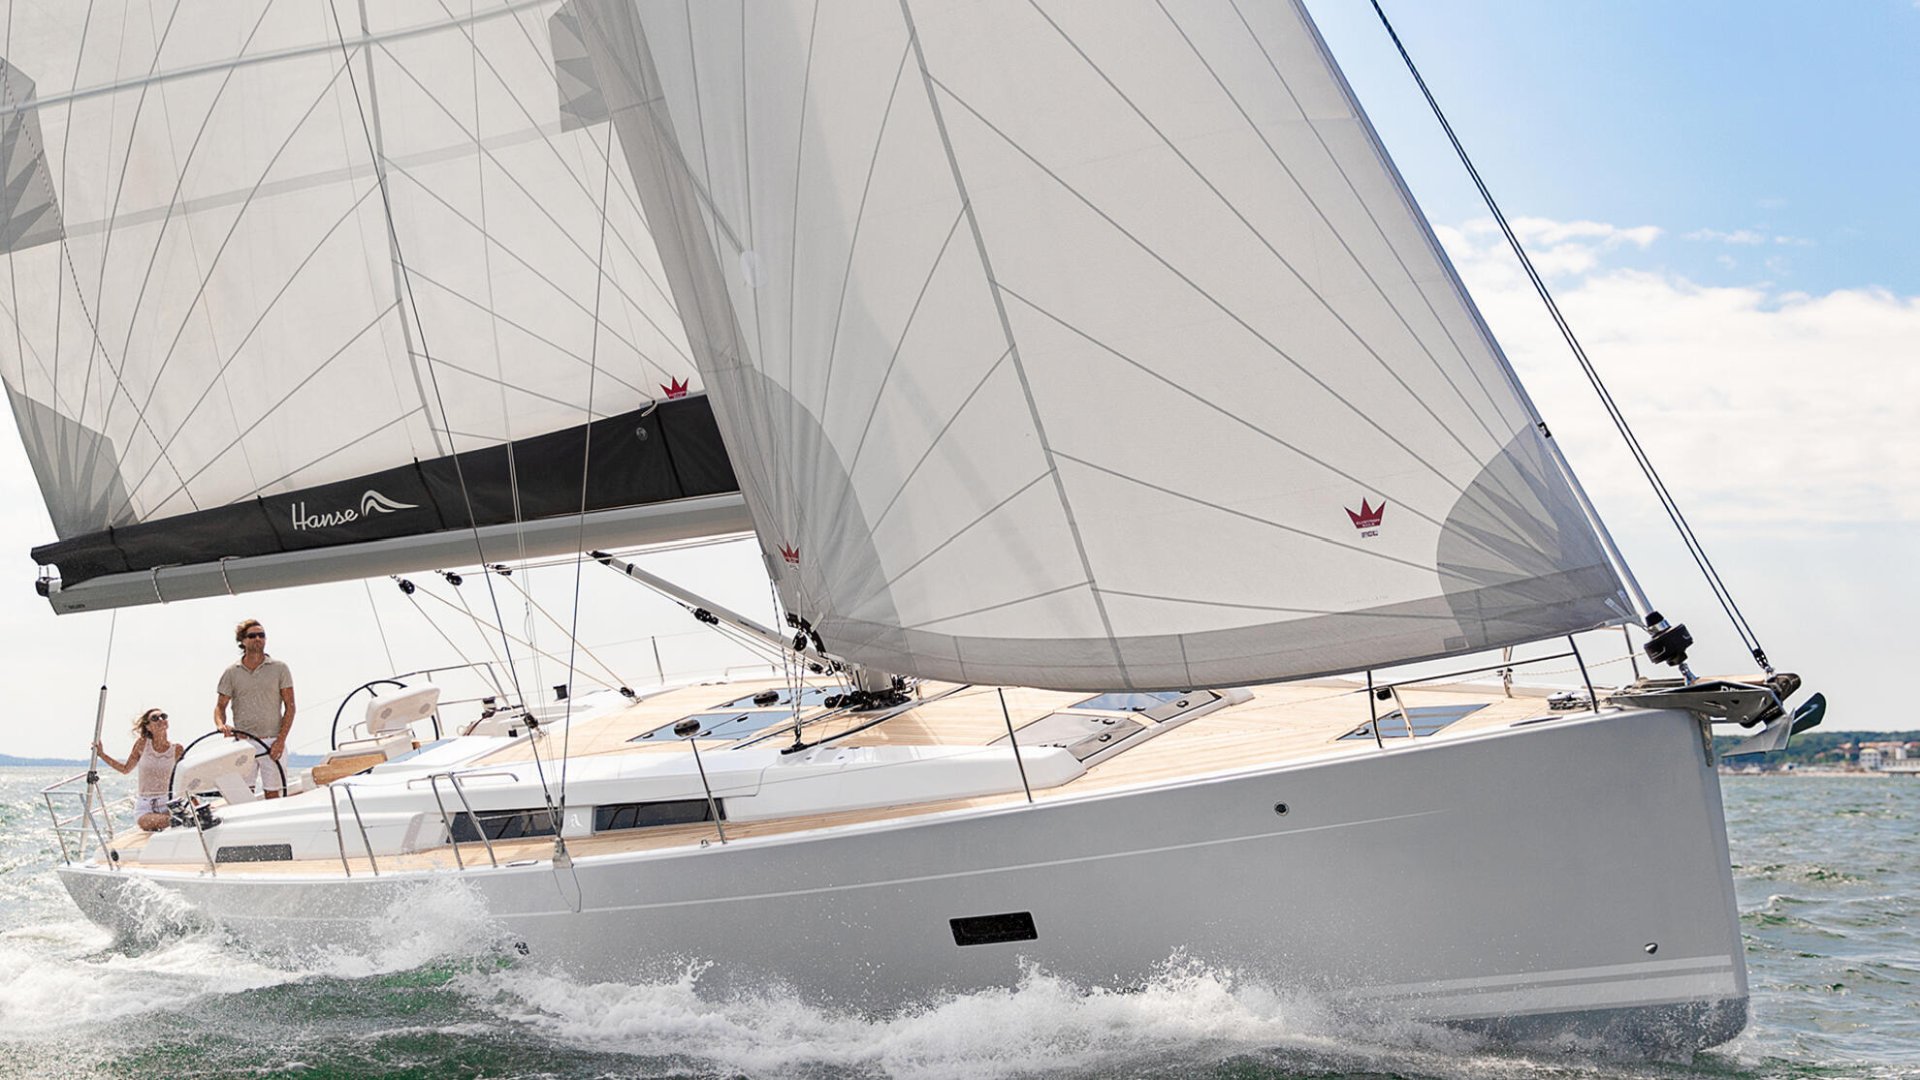 360 VR Virtual Tours of the Hanse 458